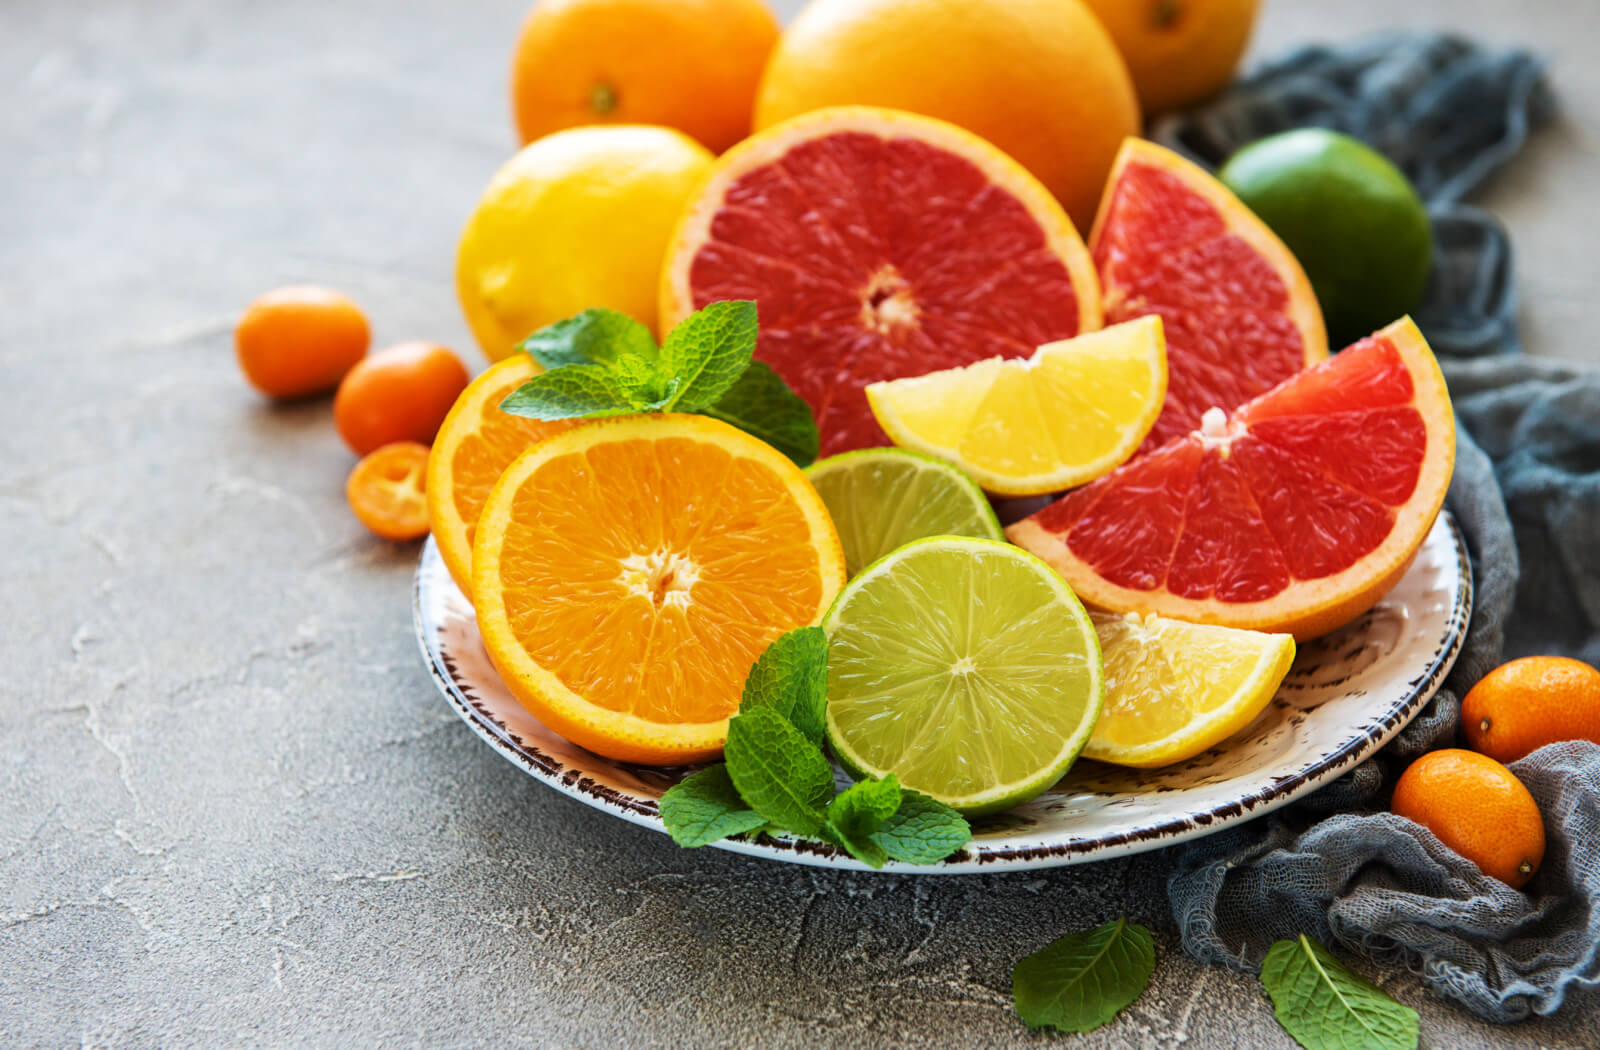 An assortment of various sliced citrus fruits on a plate.